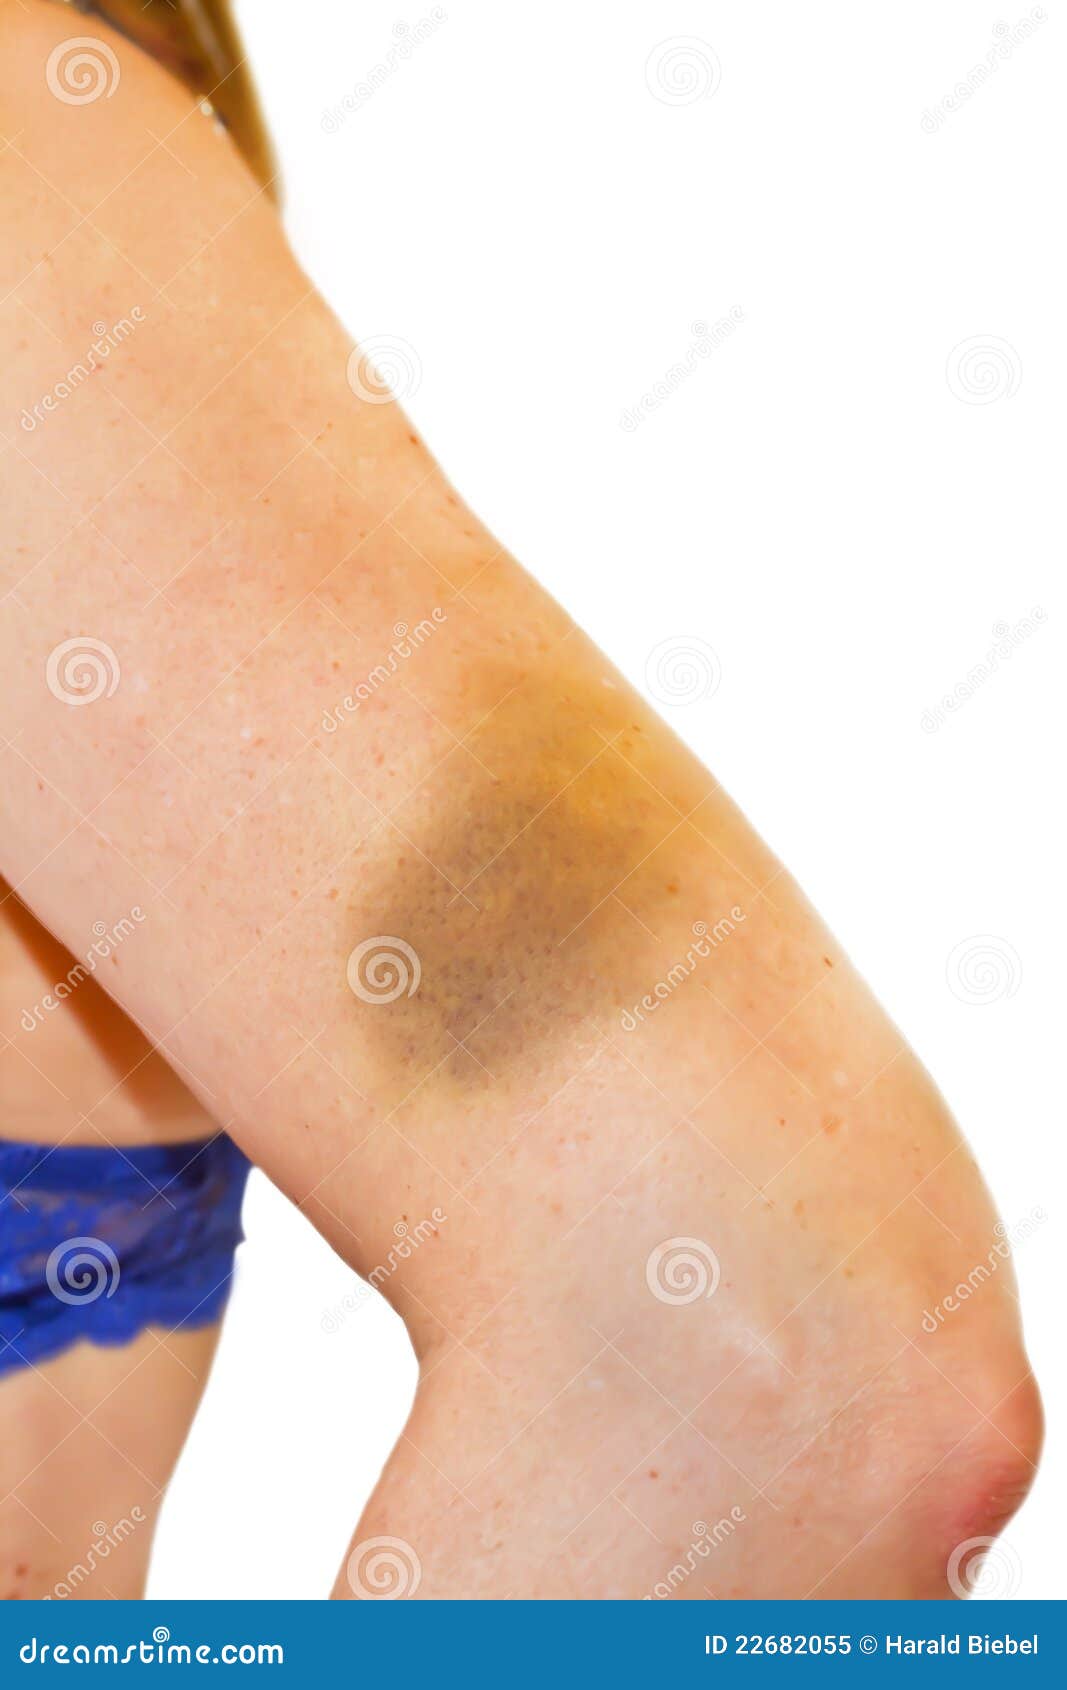 woman with a hematoma